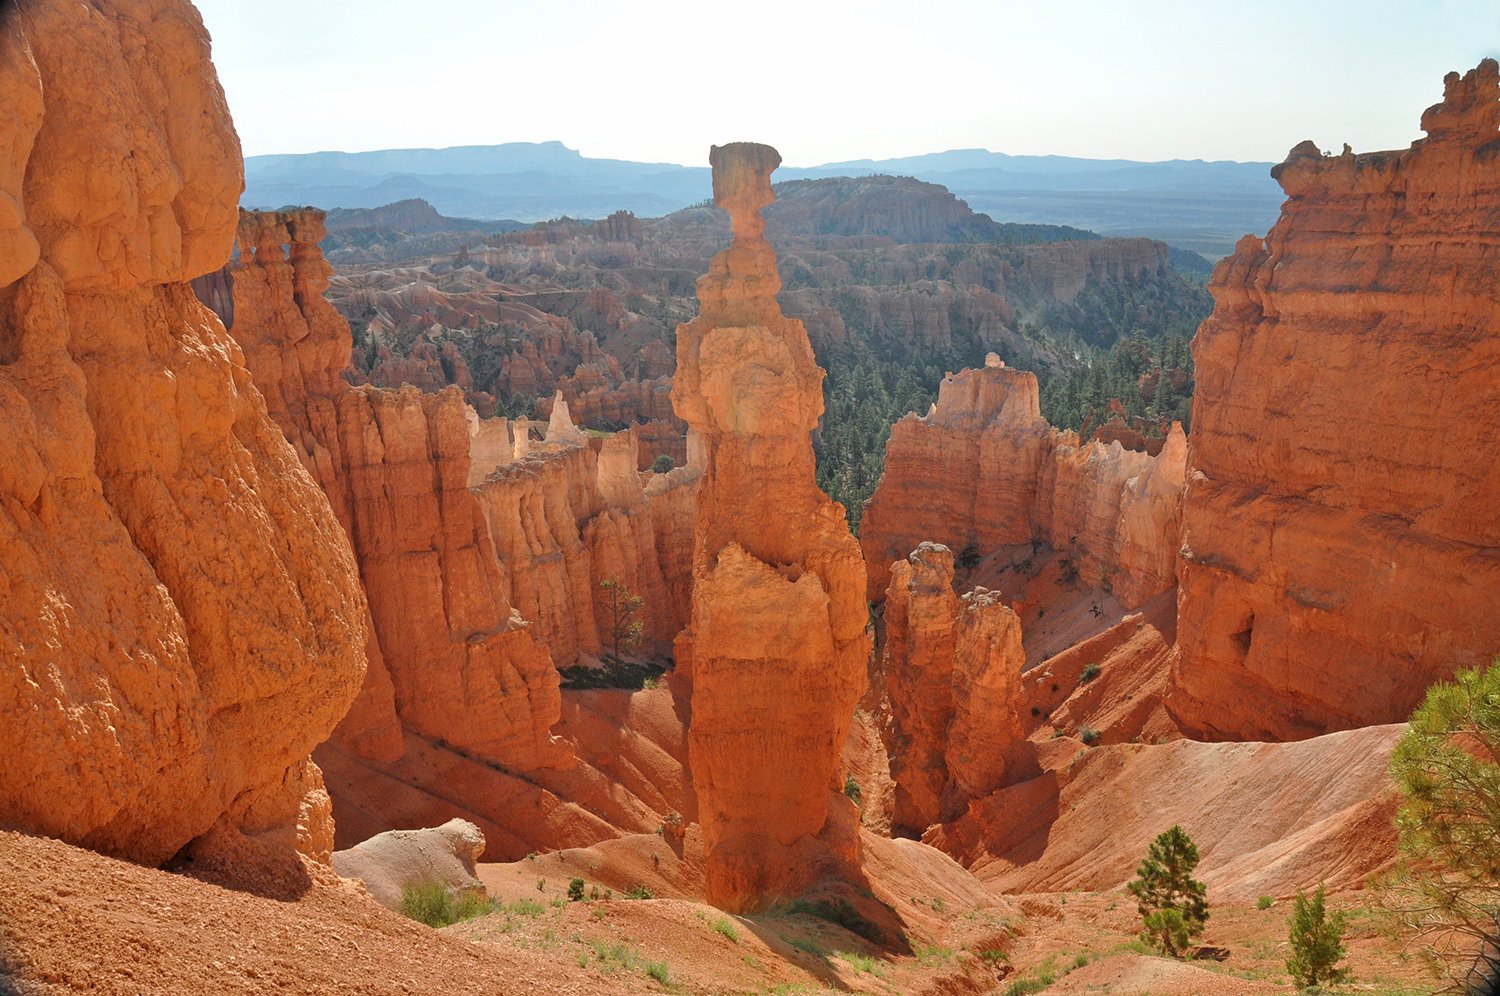 Thor's Hammer Bryce Canyon National Park